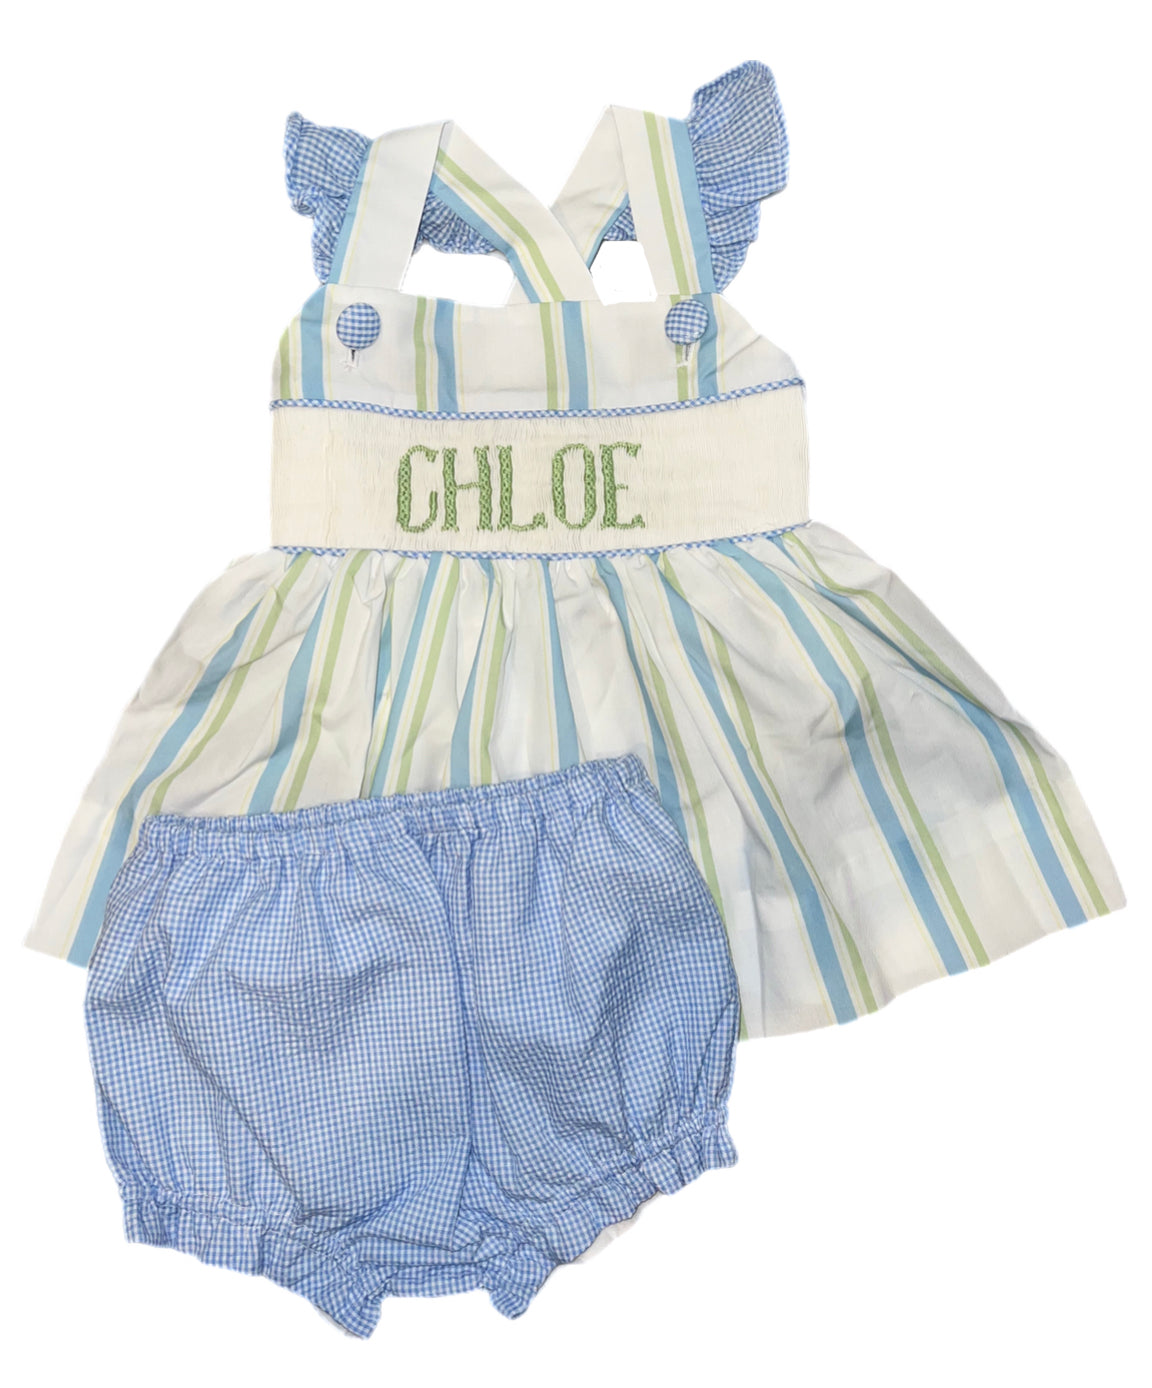 RTS: SBSC- Name Smock Collection- Brooks Stripes- Girls Woven Diaper Set “Chloe”